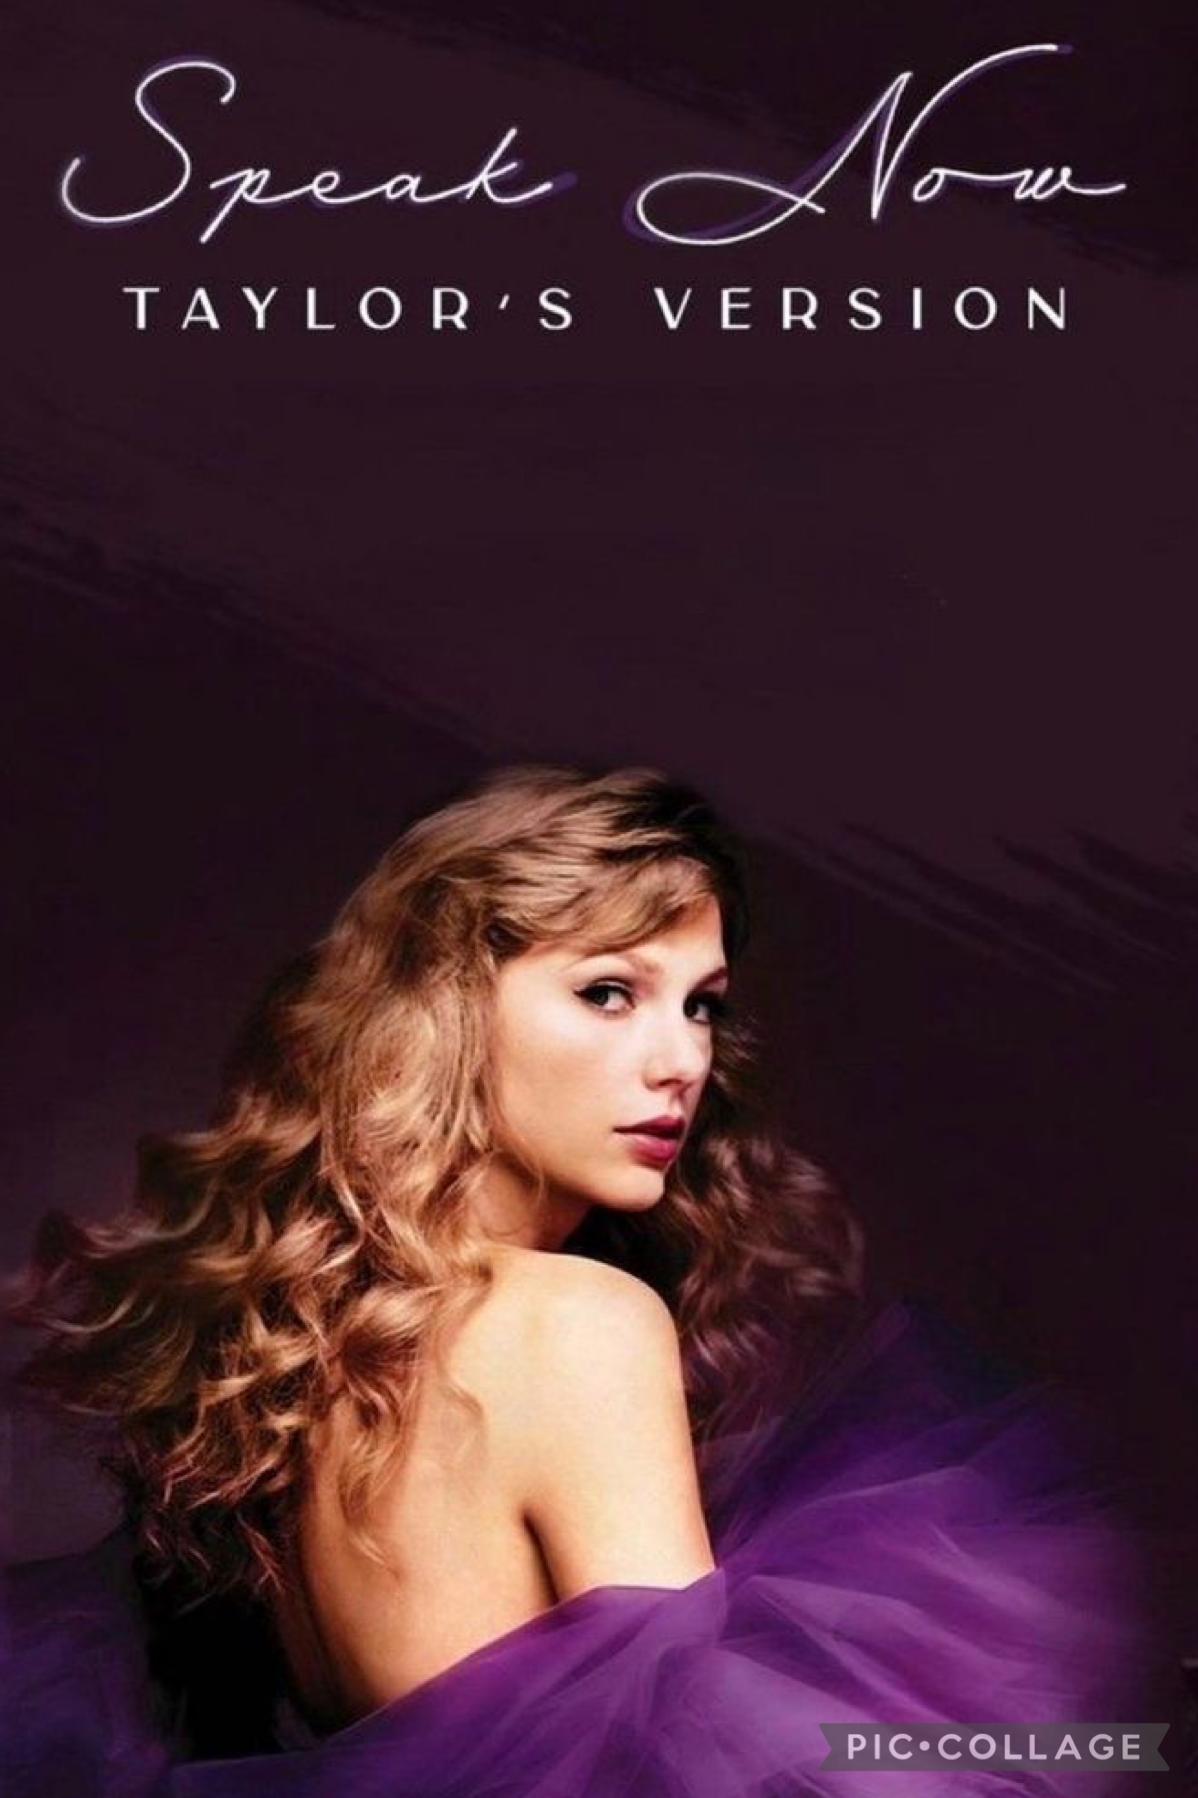 💜 GO STREAM! 💜
I’m so proud of taylor for this re recording!! ITS SO GOOD! my fav vault track is definitely Timeless and Castles Crumbling. What do you guys think??